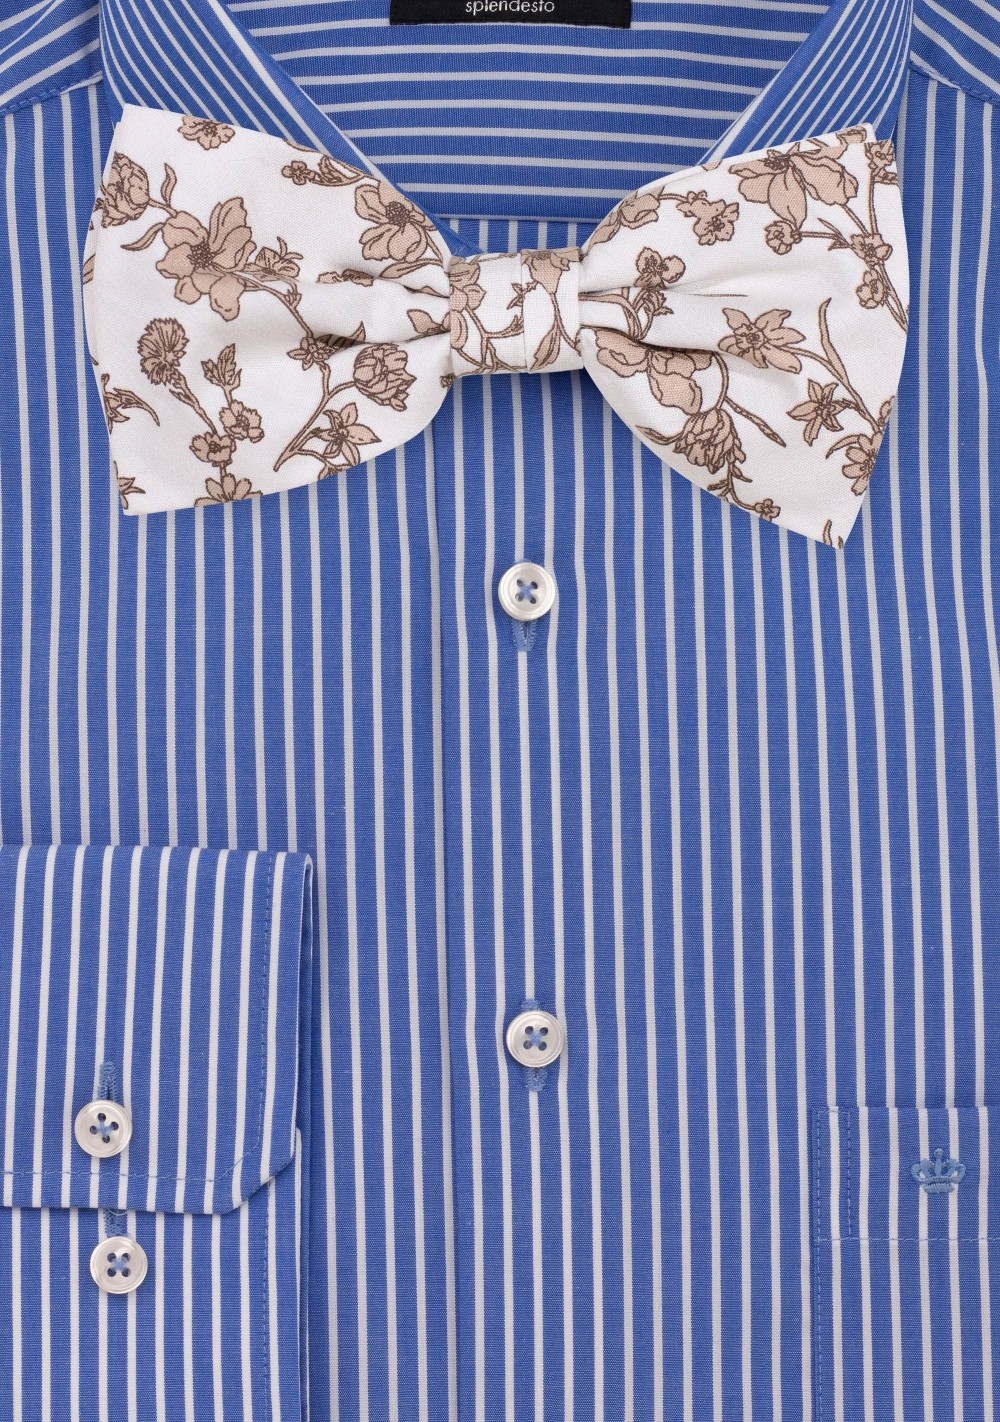 White and Tan Floral Bowtie